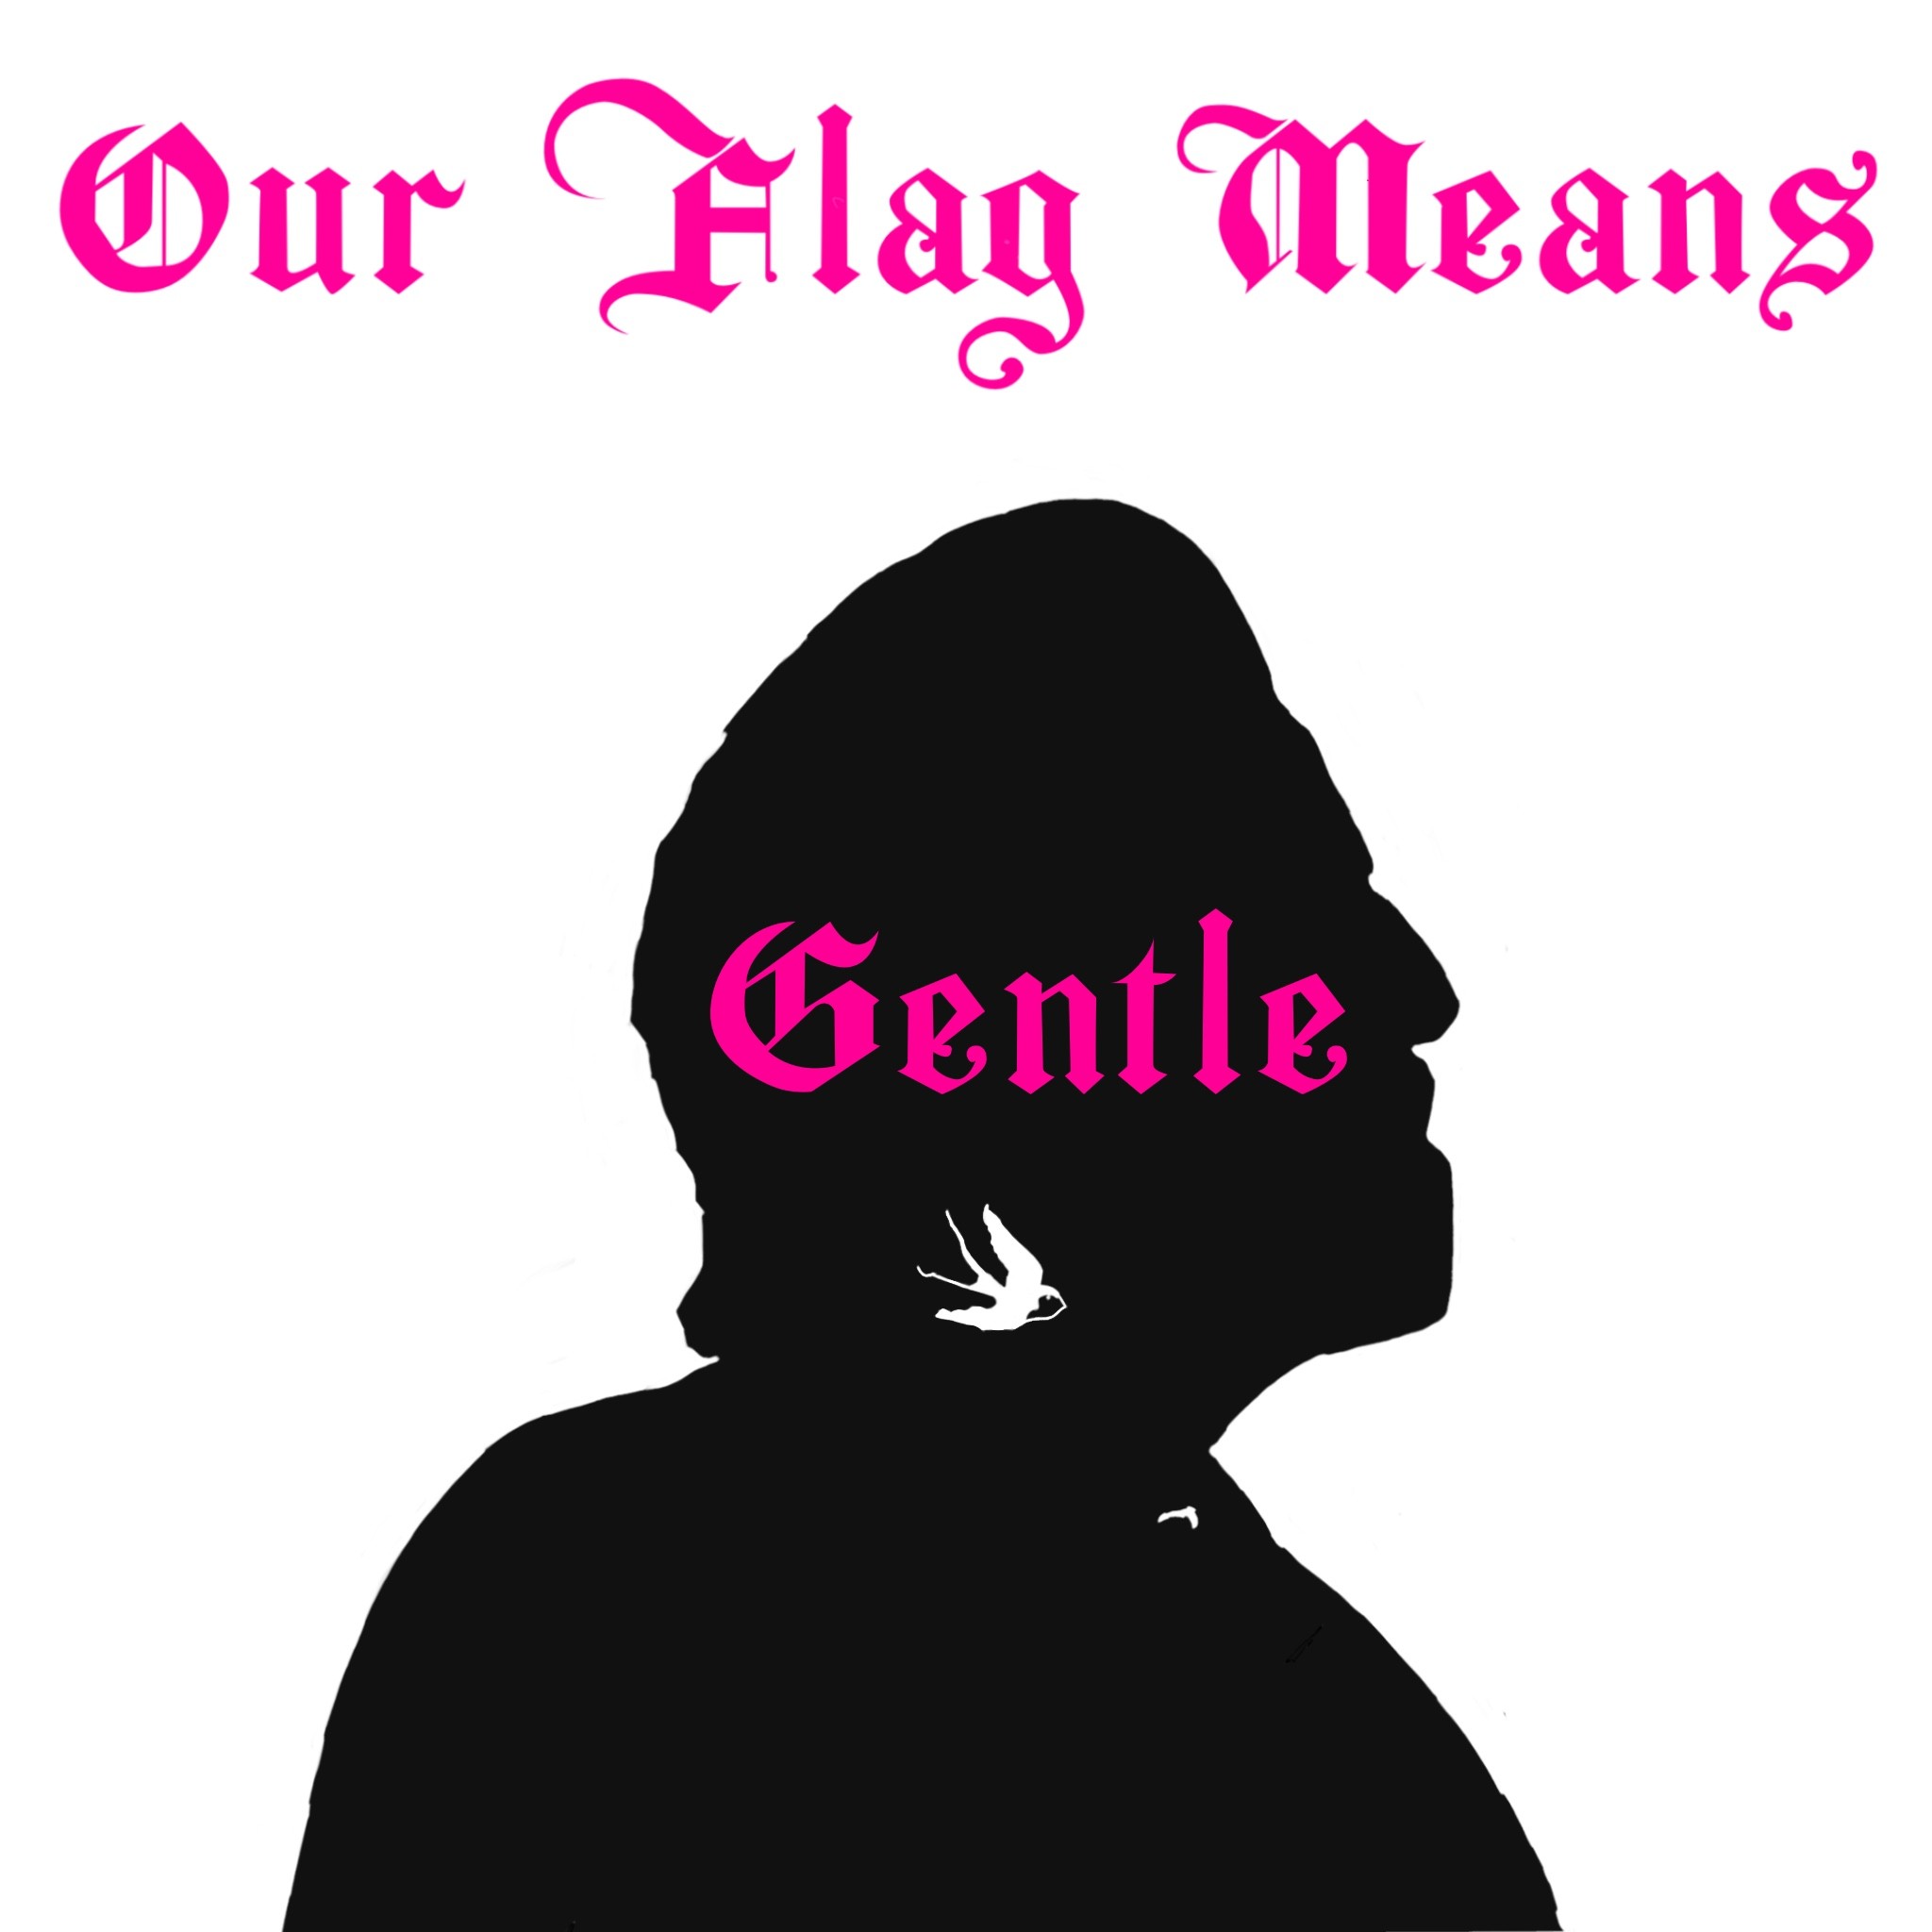 Gentle- Our Flag Means Death Episode 3 "A Gentleman Pirate"